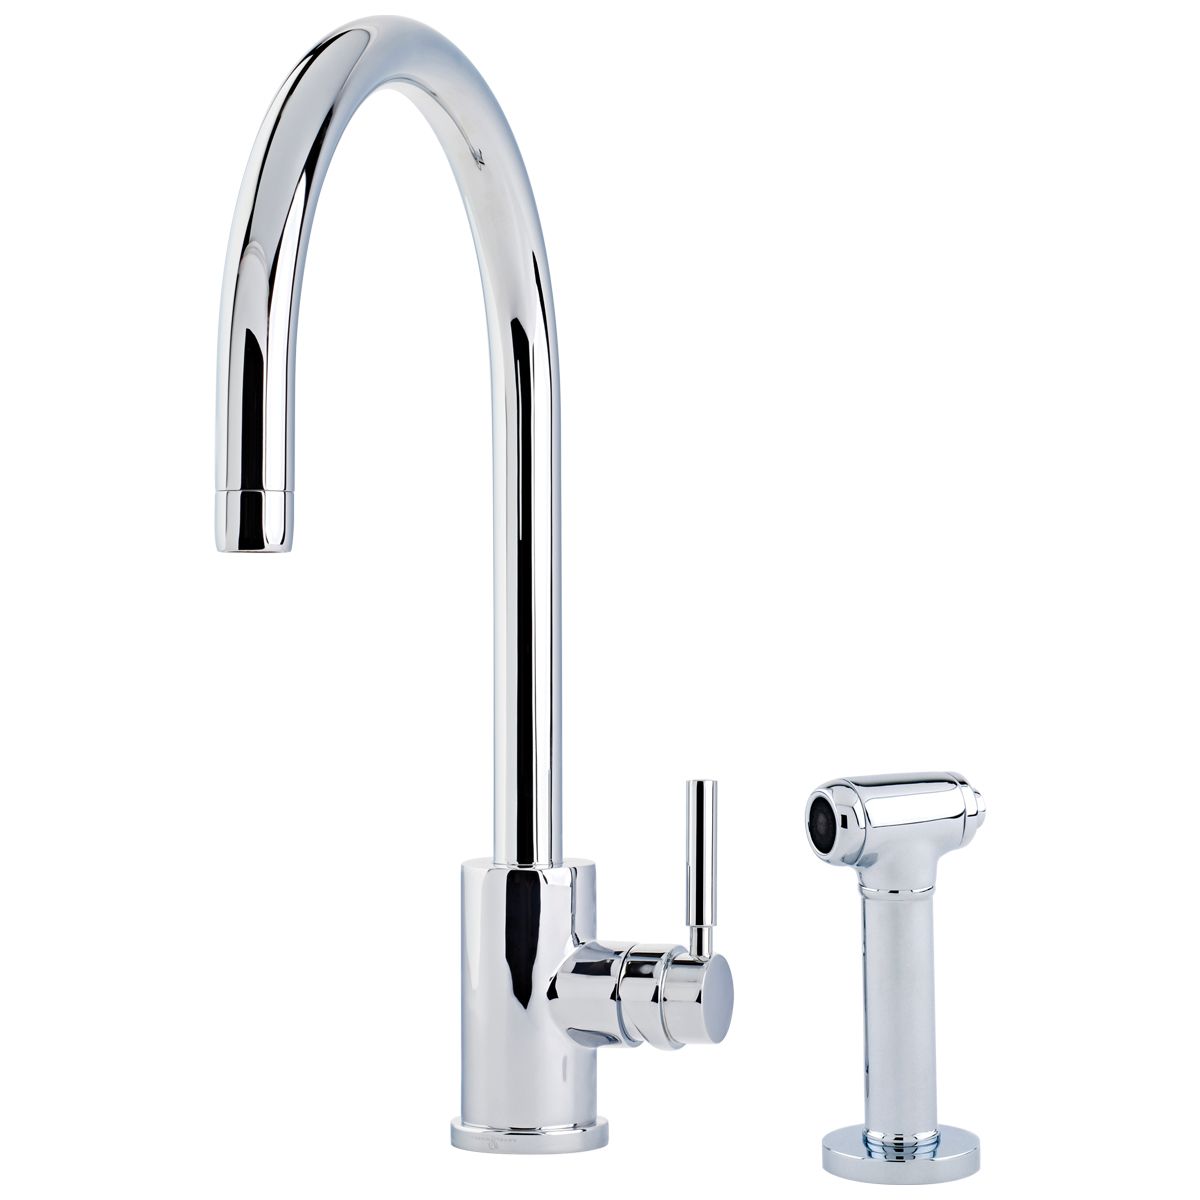 Juliet Monobloc Tap with C Spout and Rinse – Perrin & Rowe